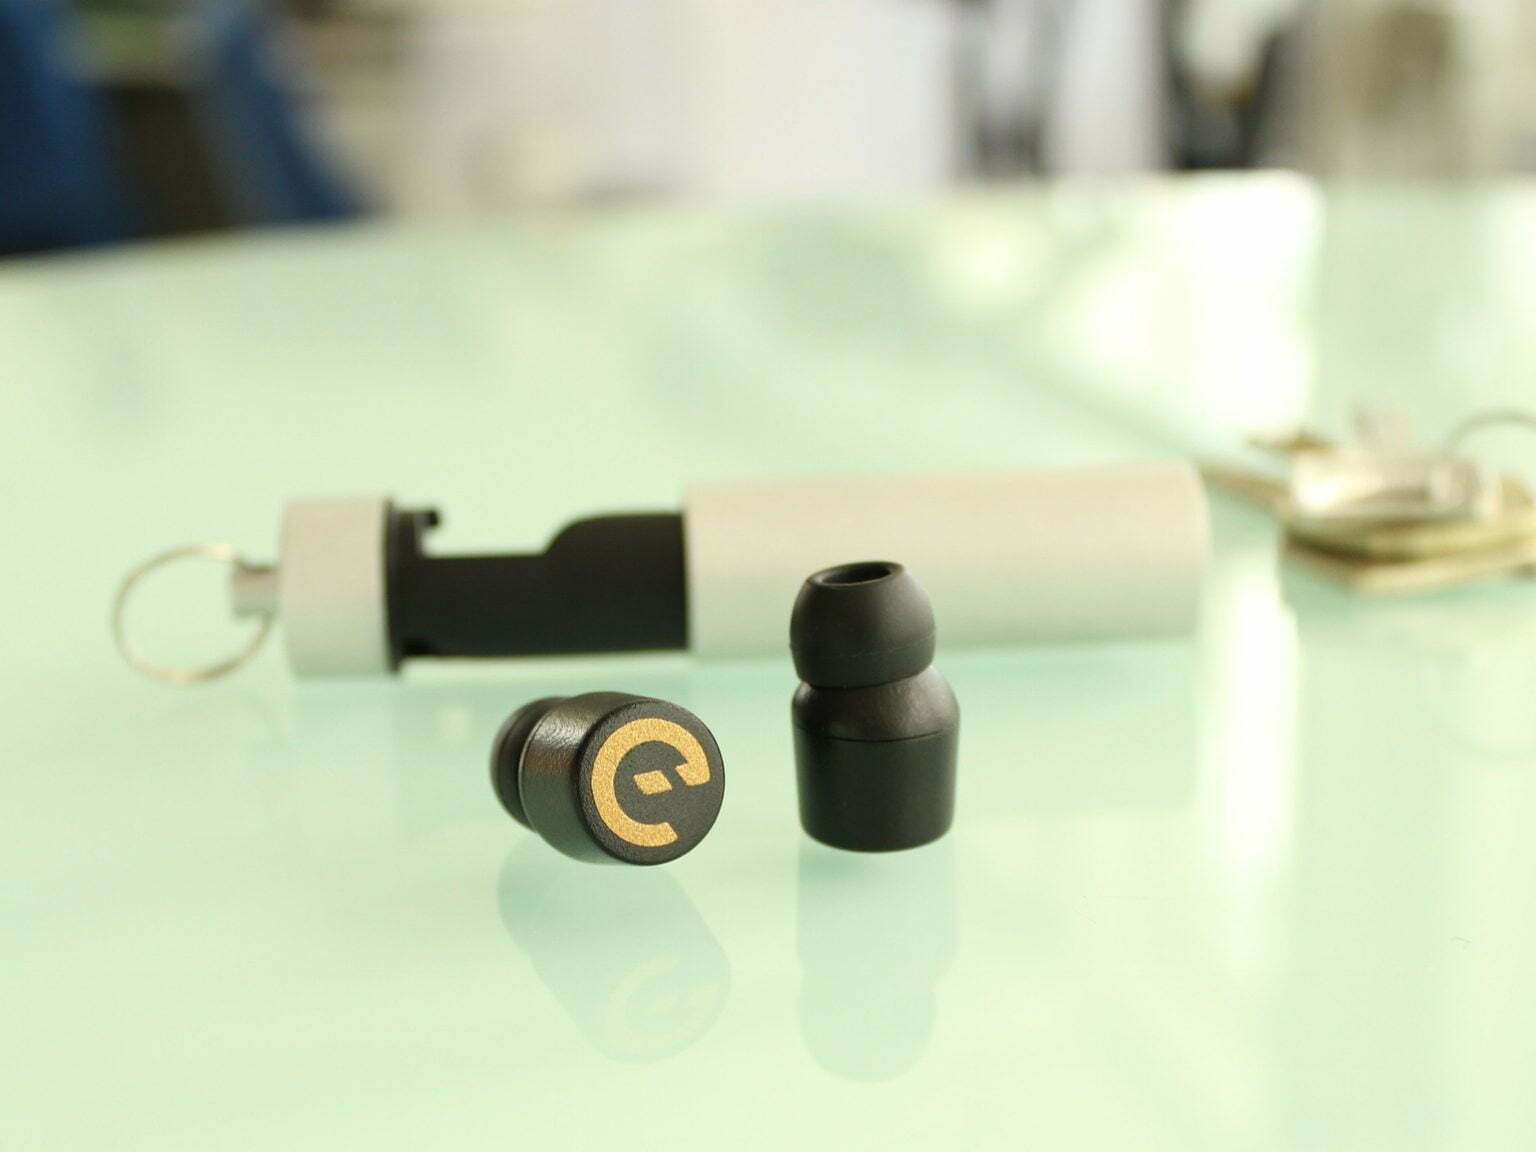 Earin Review: Wireless Earbuds Done Right…Almost